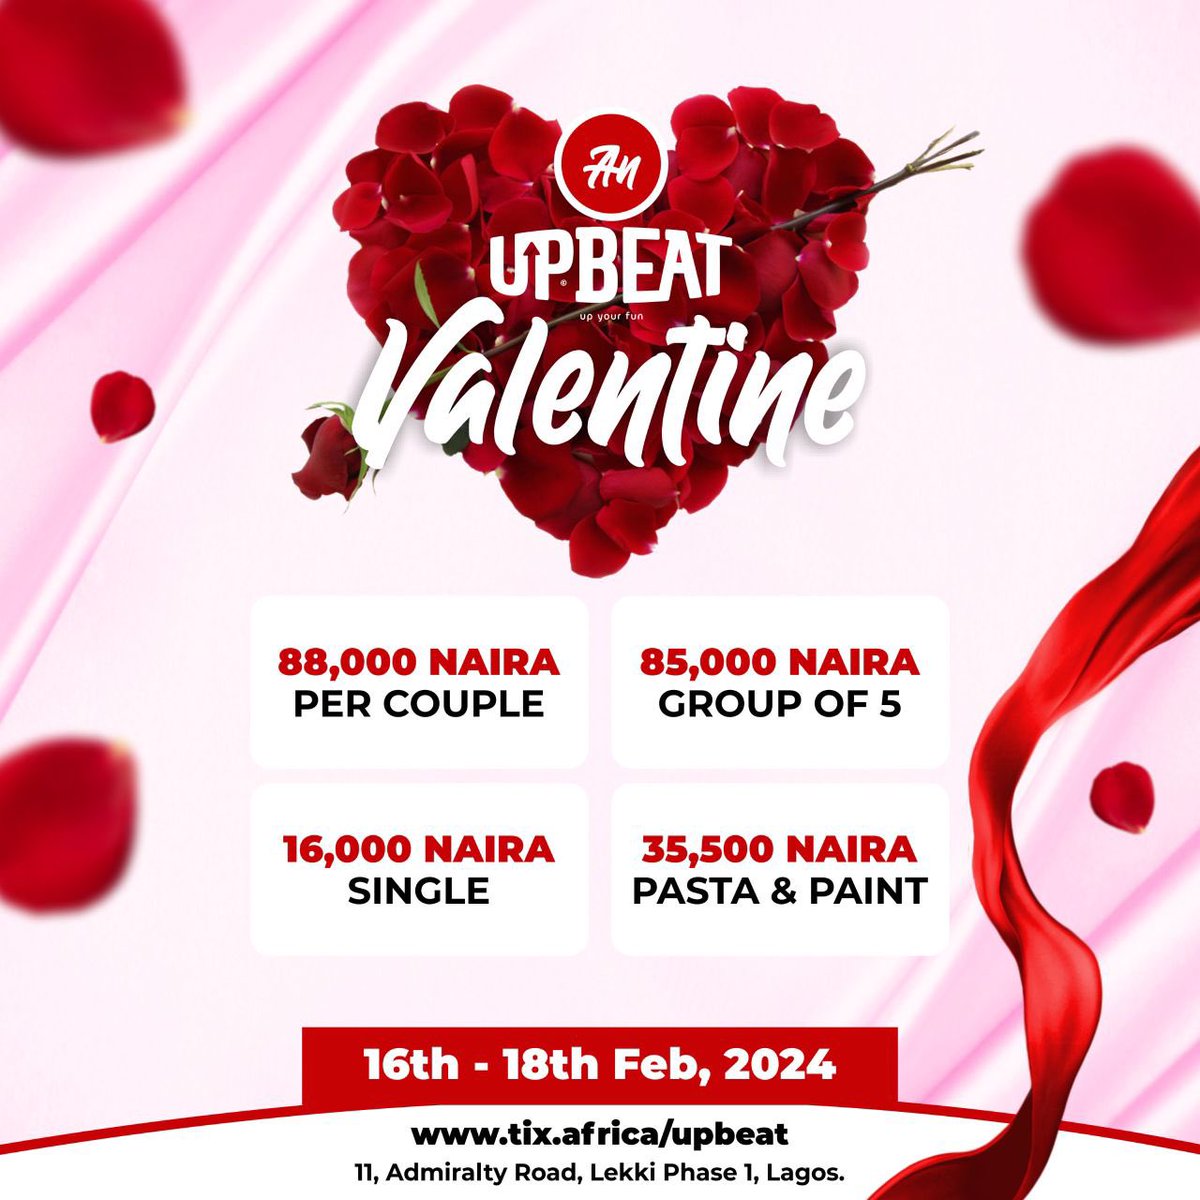 Spend this weekend with your loved ones at the @UpbeatCentre

They curated amazing activities specifically tailored for lovers, singles, and groups, giving you lots of fun and bonding activities

You can also gift your friends and loved ones. 

#AnUpBeatValentine